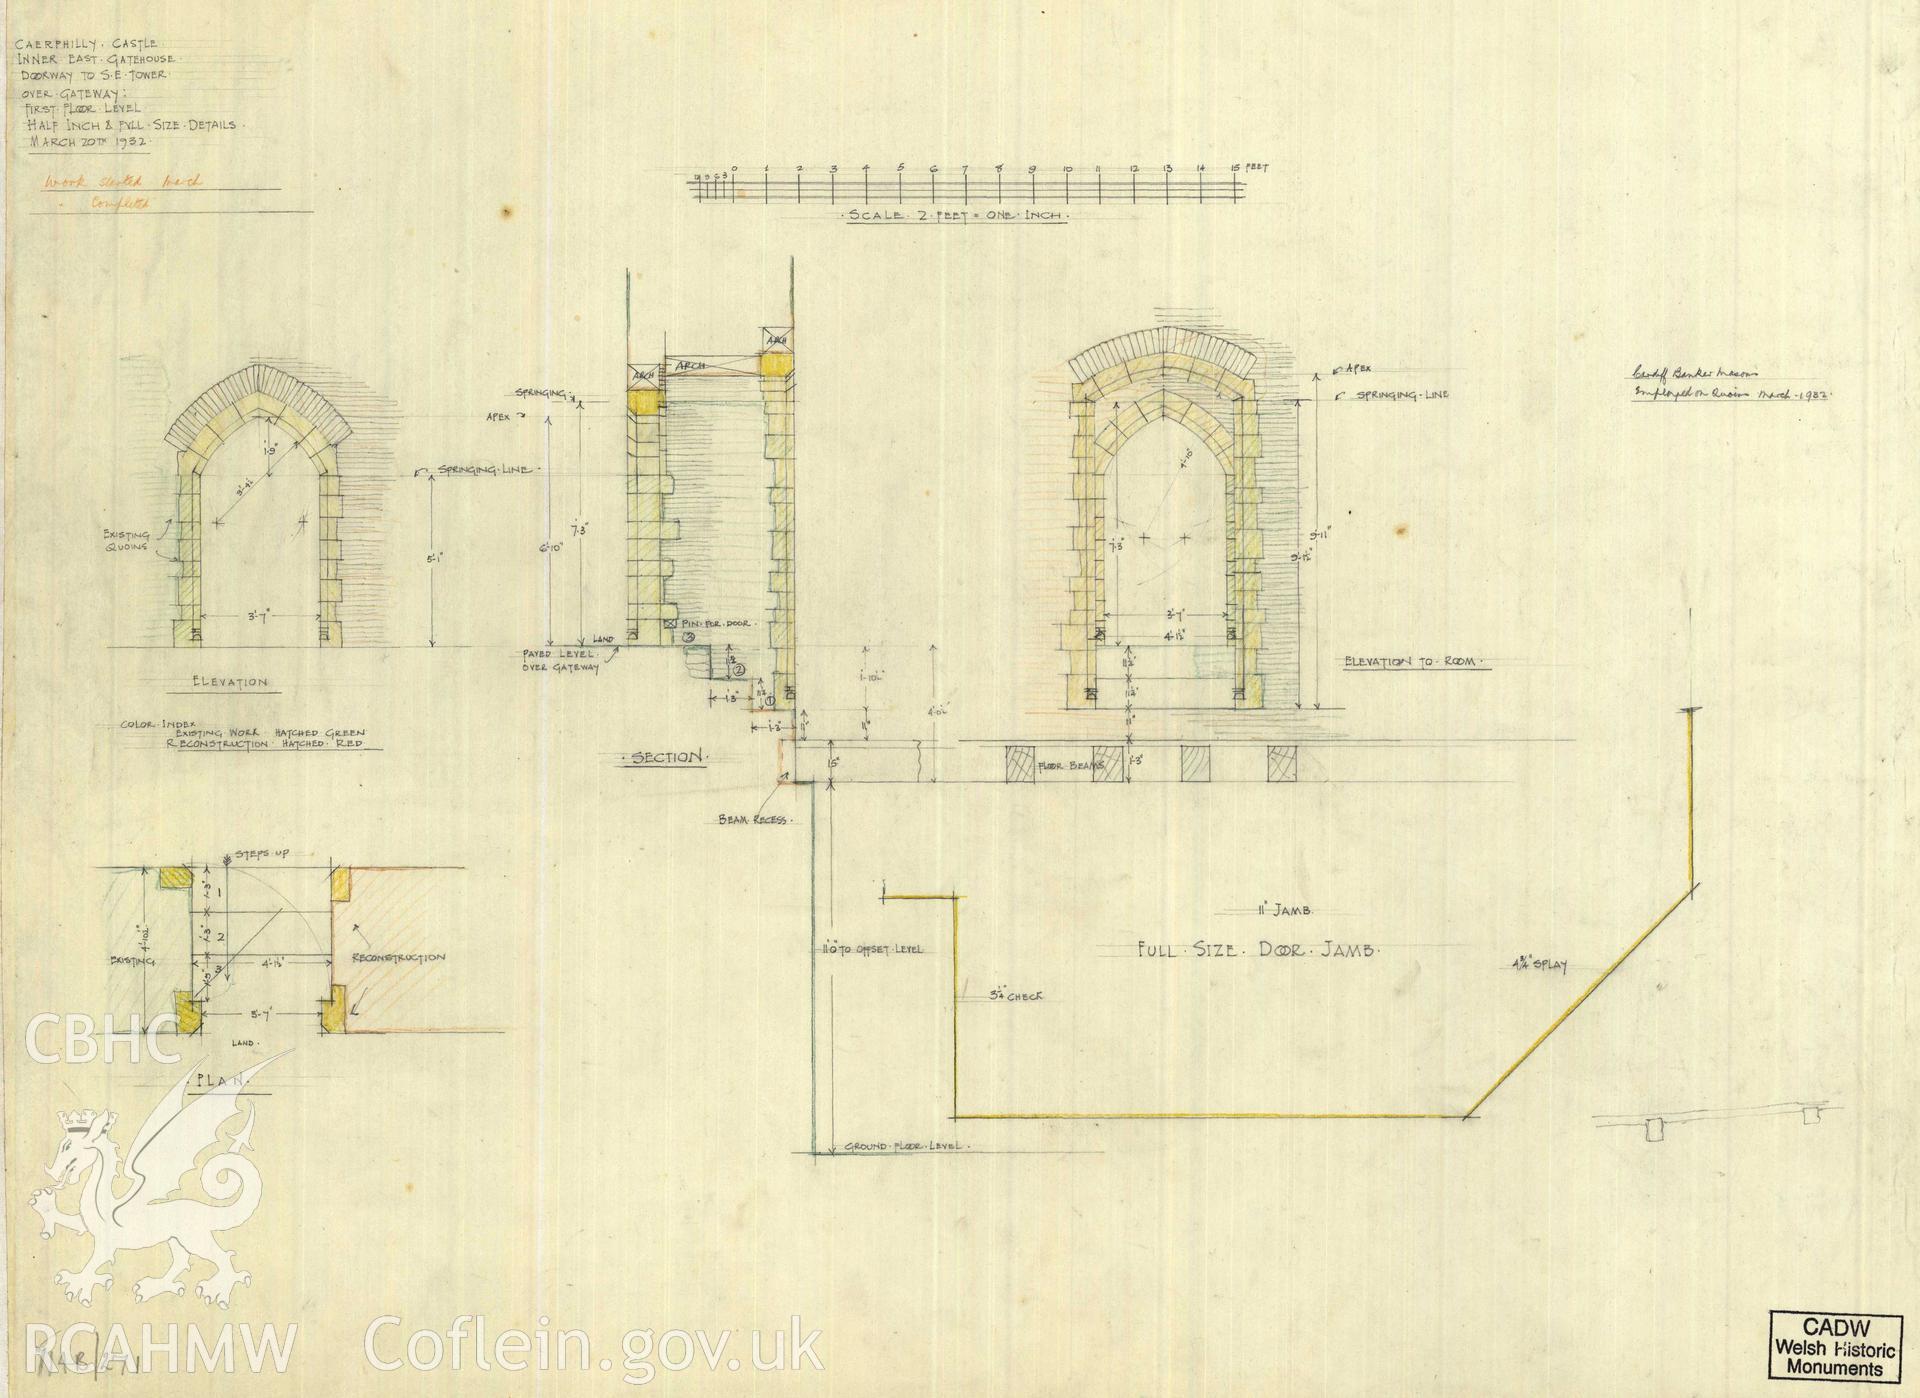 Cadw guardianship monument drawing of Caerphilly Castle. Inner E gate, up floor SE tower door. Cadw Ref. No:714B/271. Scale 1:24.1.